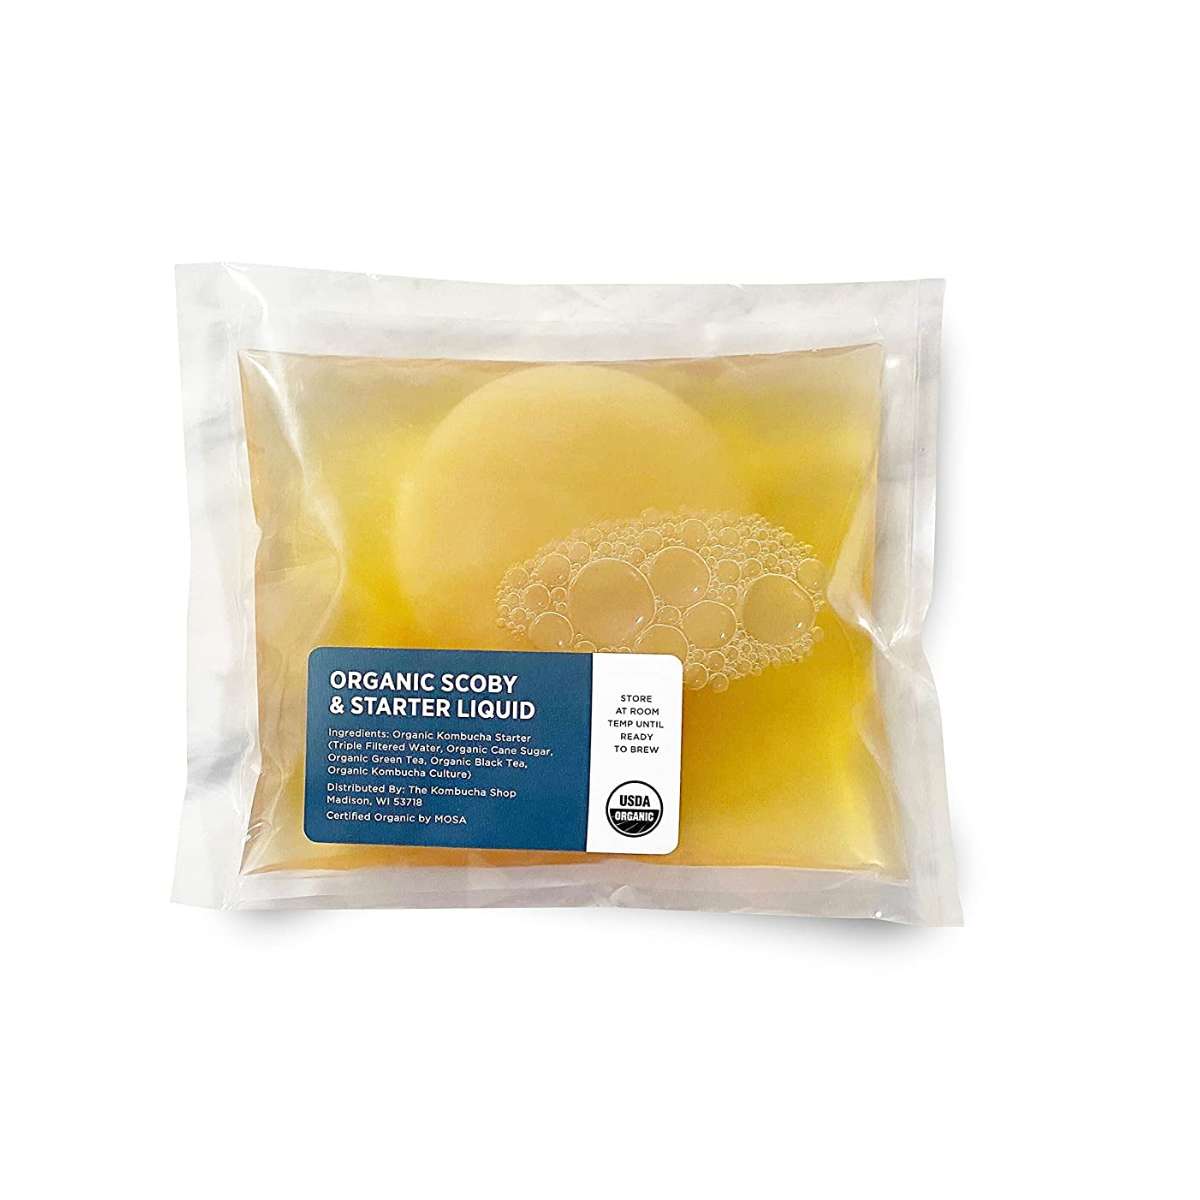 A picture of a healthy kombucha scoby packaged in starter liquid. Packaged scoby can be used in place of making your own scoby from scratch and can be purchased online.